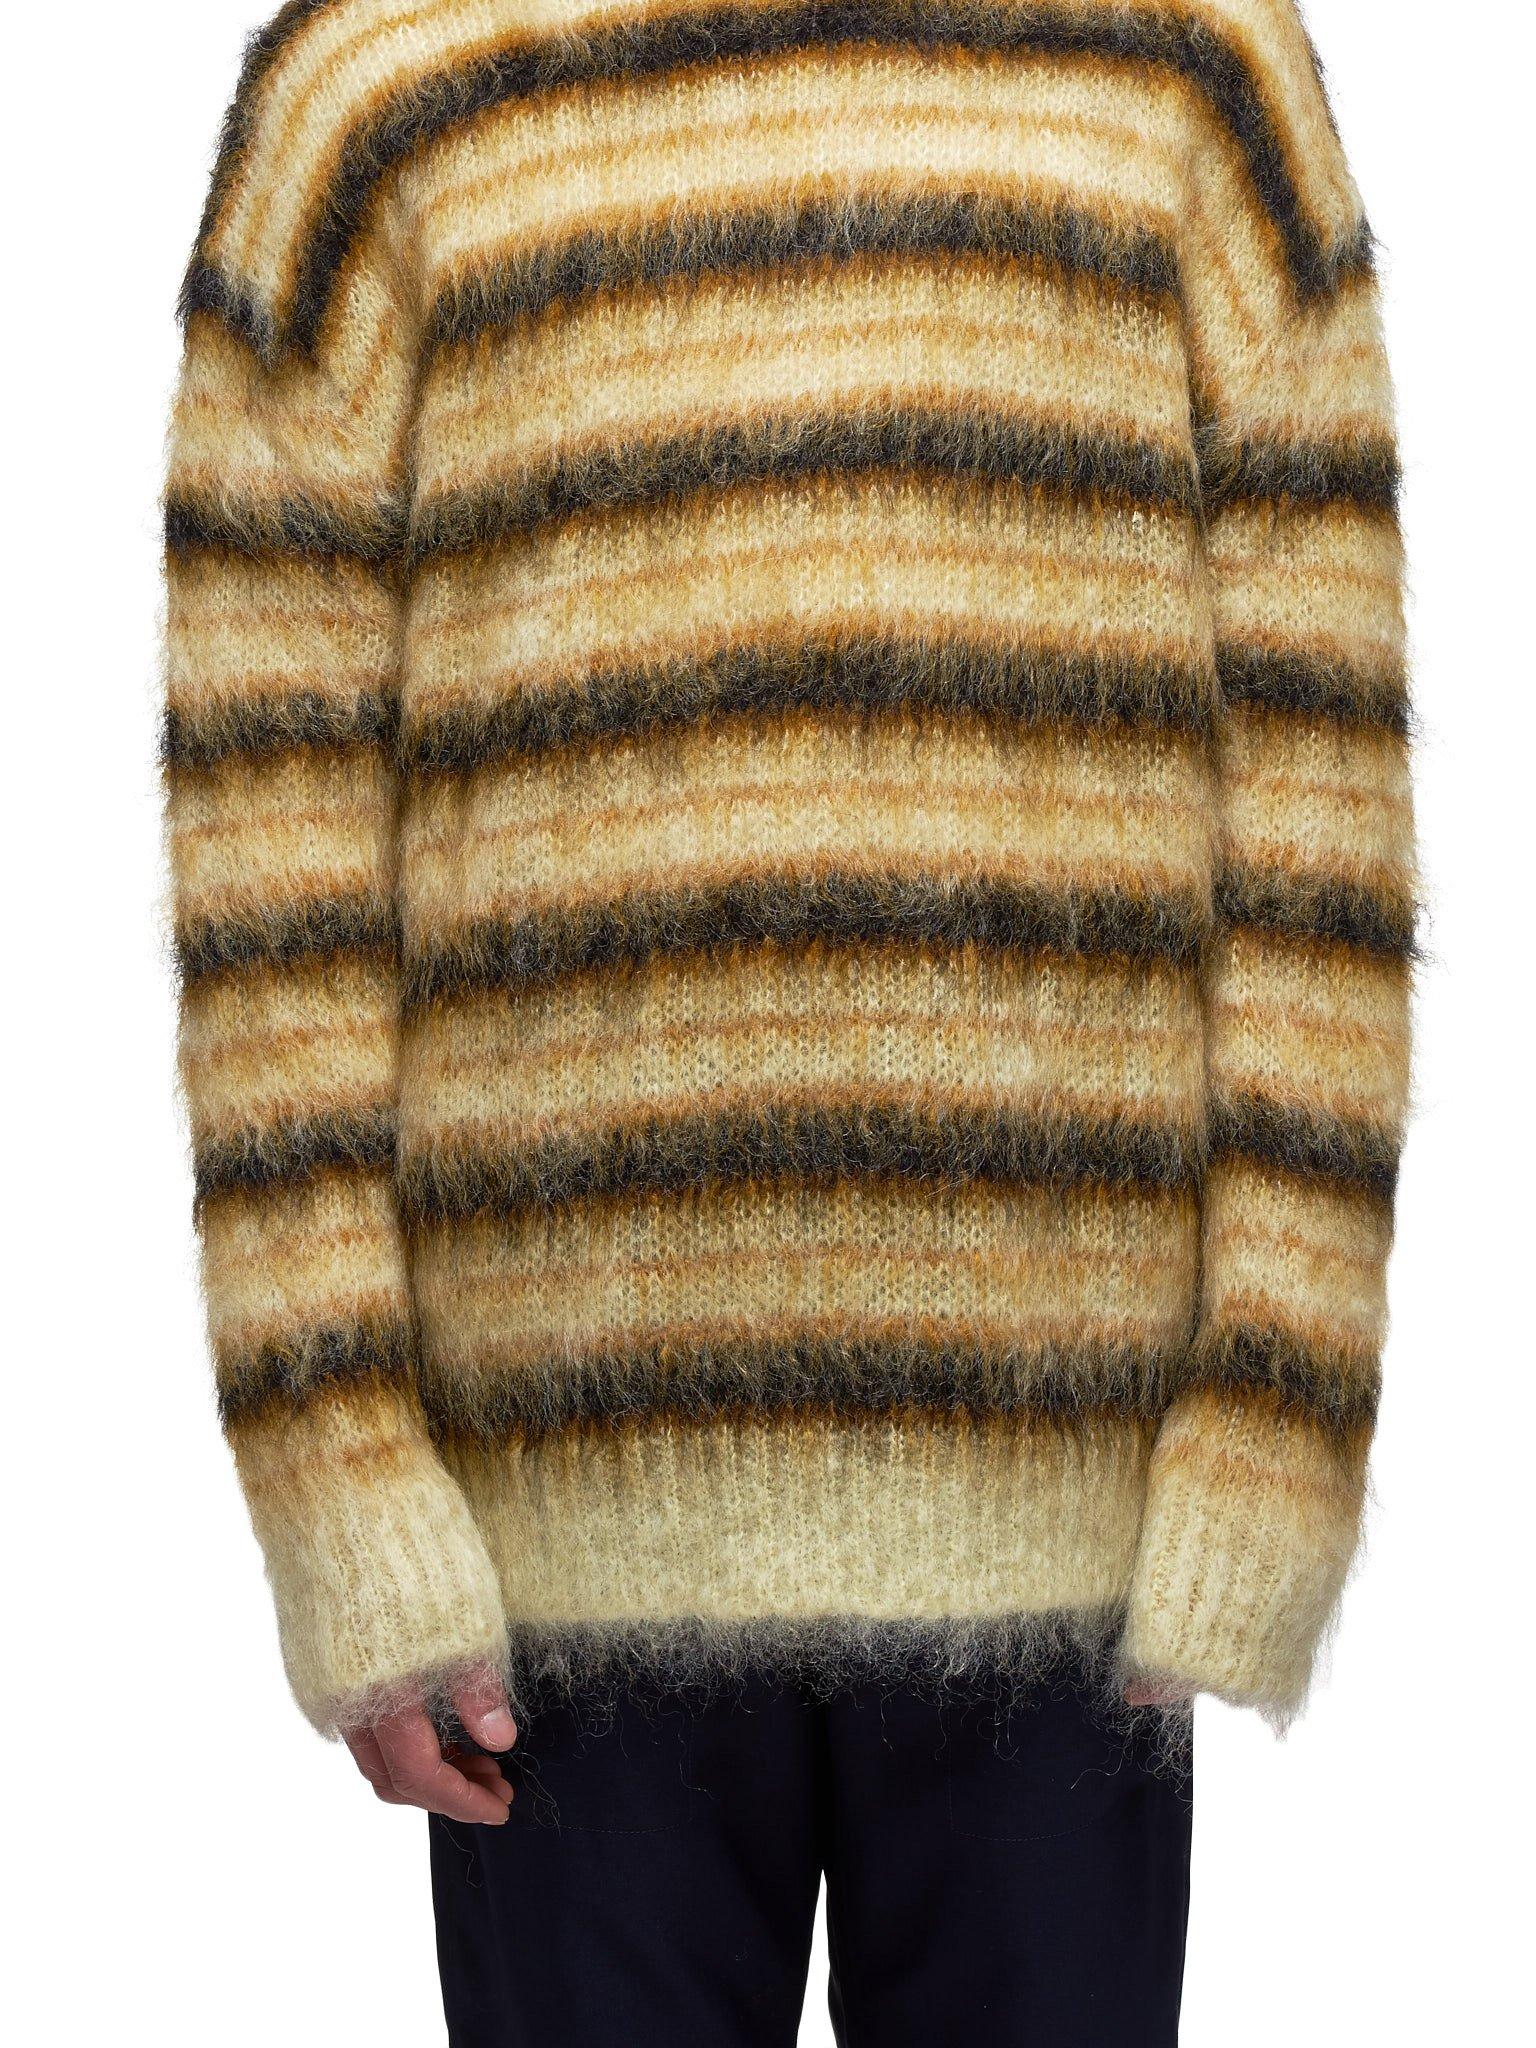 Marni Synthetic Mohair Sweater in Yellow for Men - Lyst